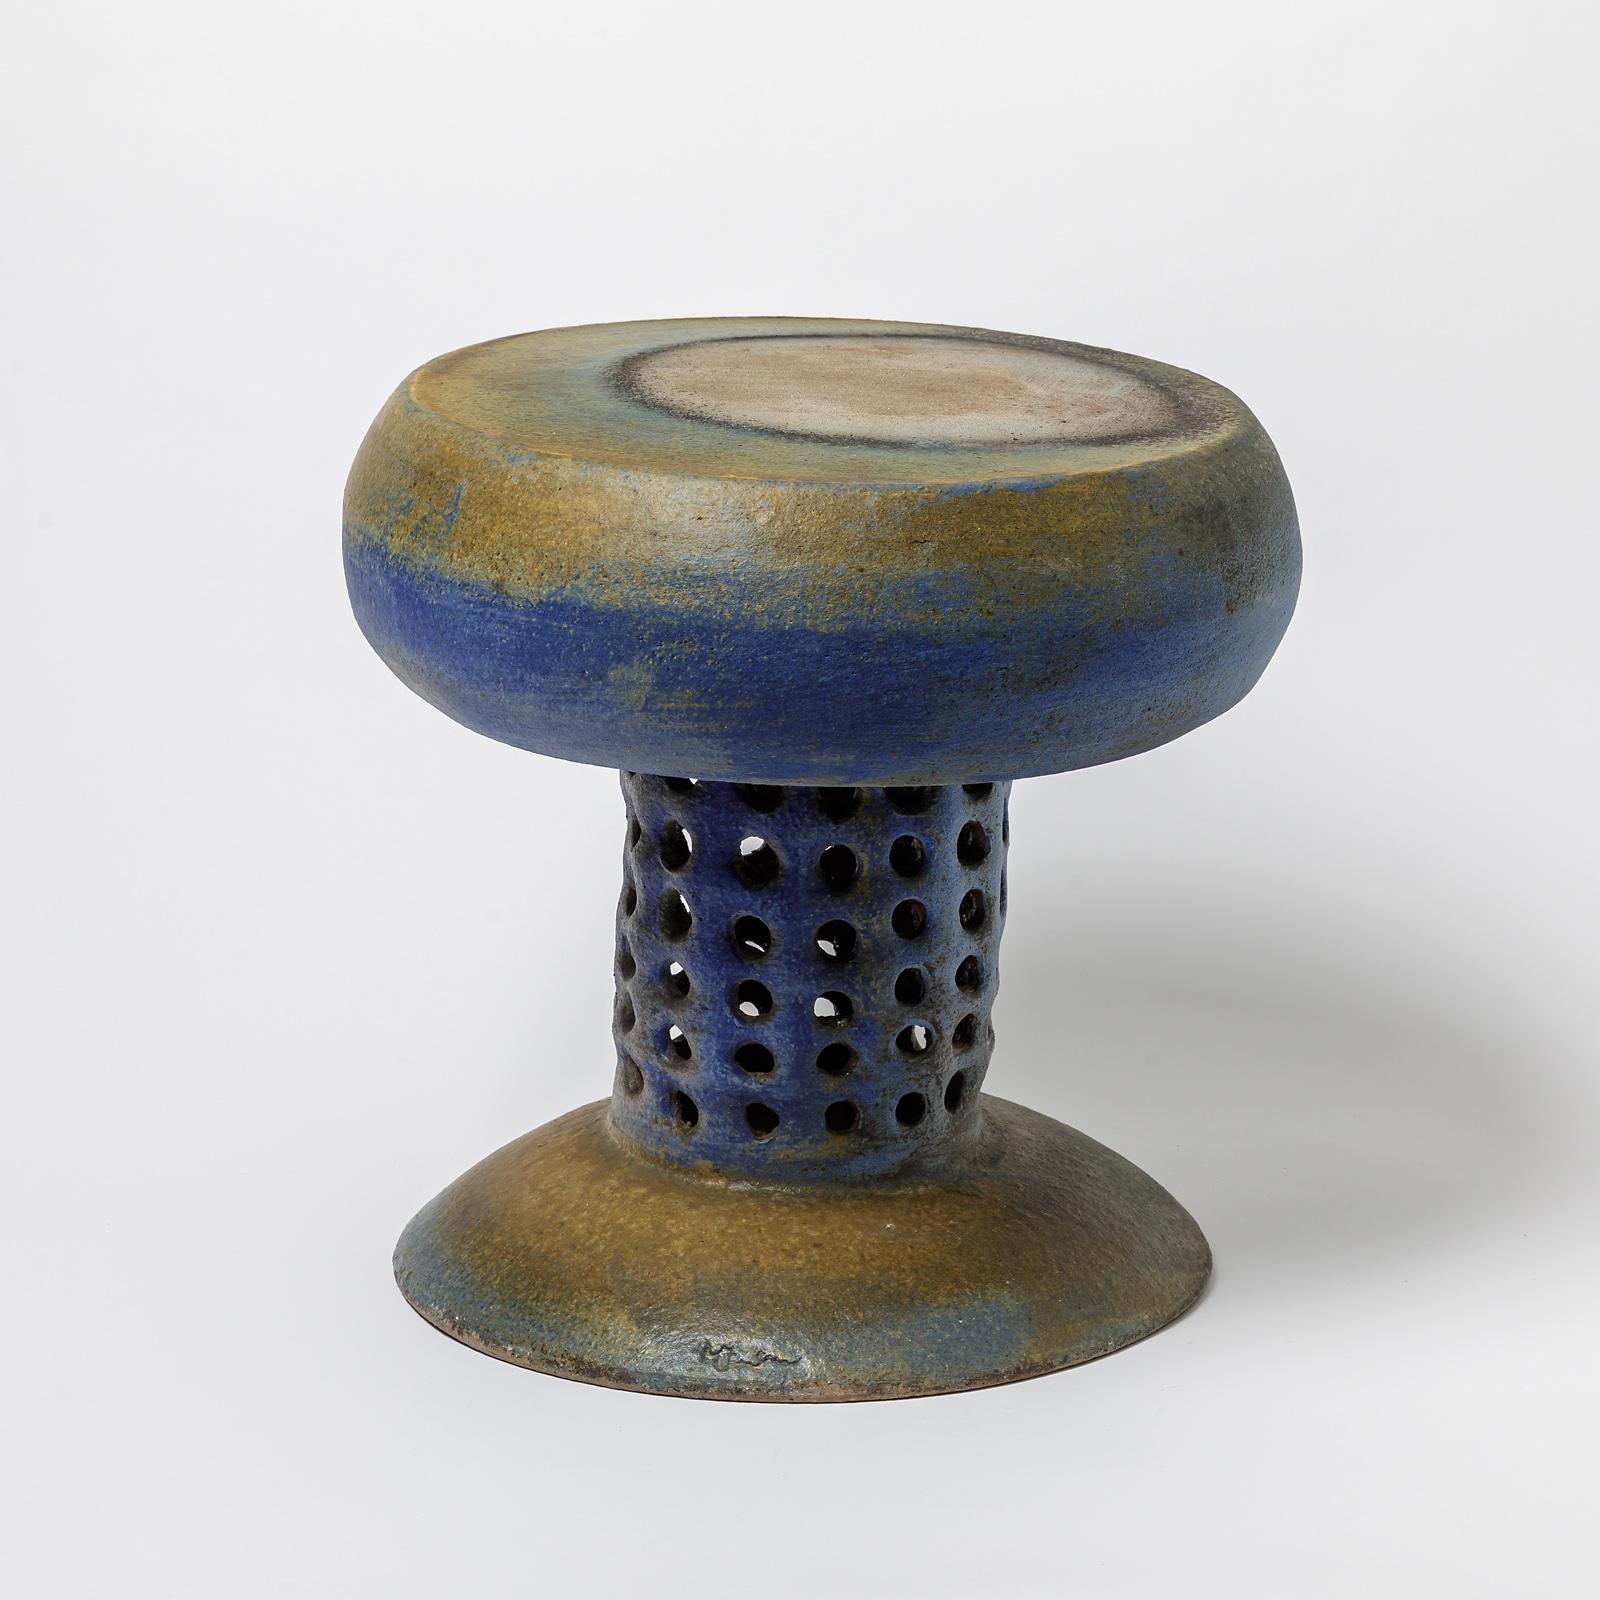 French Ceramic Stool or Table with Glazes Decoration by Mia Jensen, circa 2021